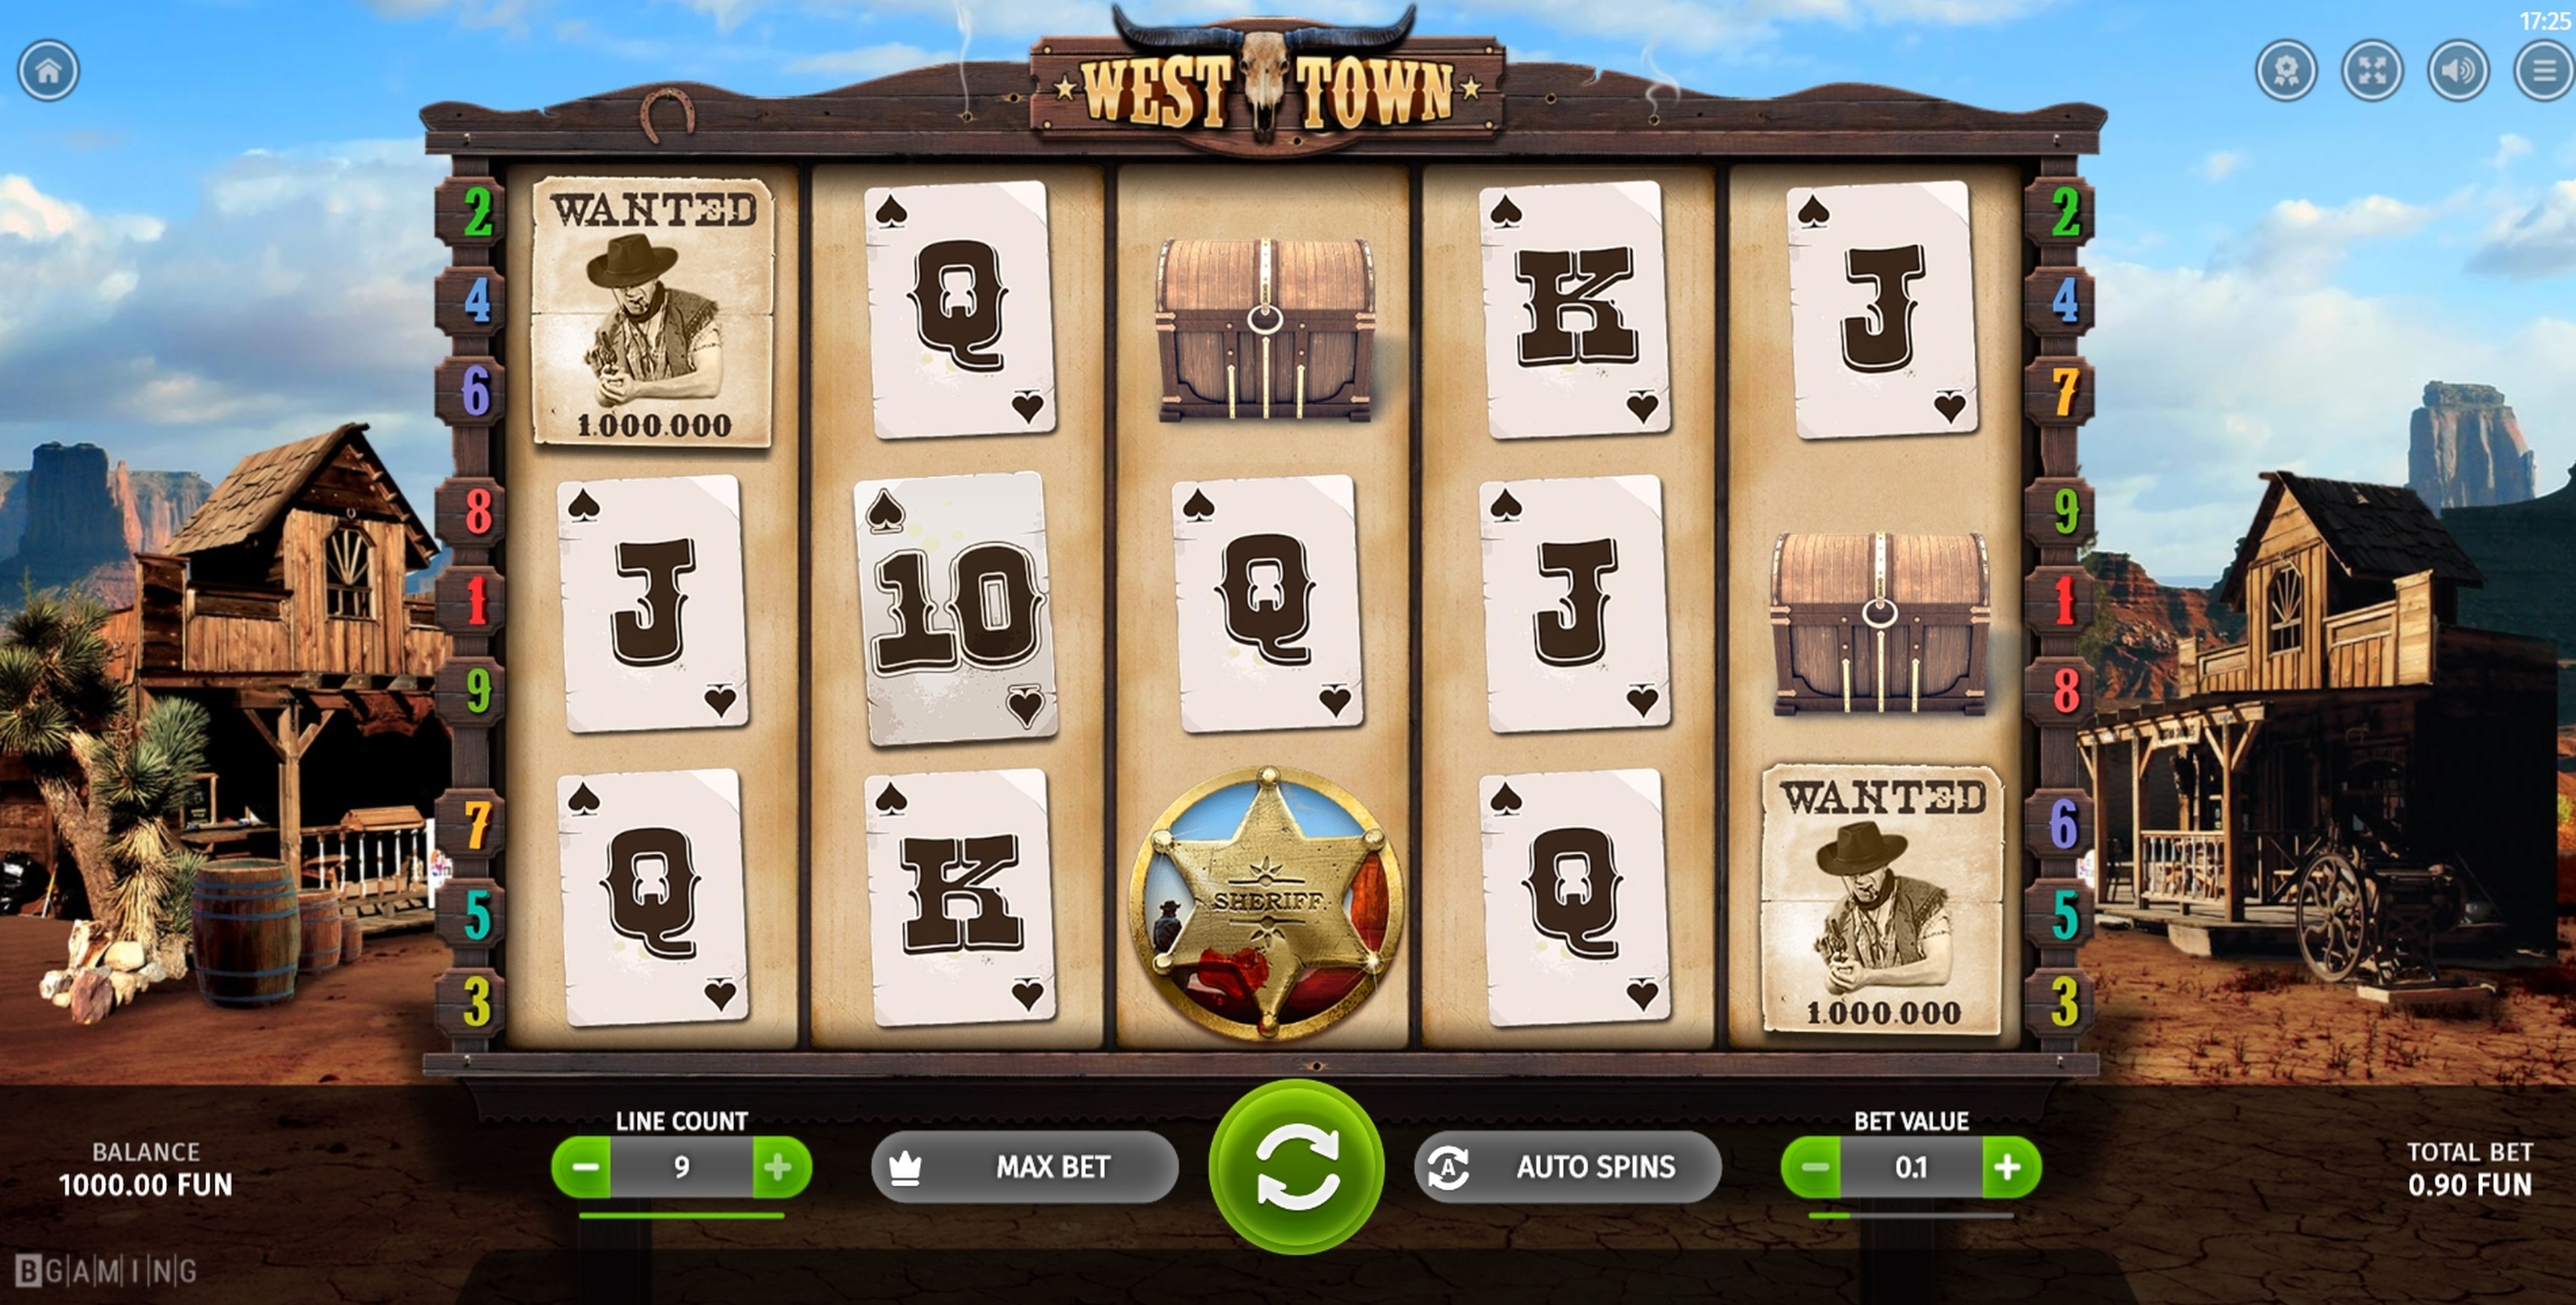 Reels in West Town Slot Game by BGAMING